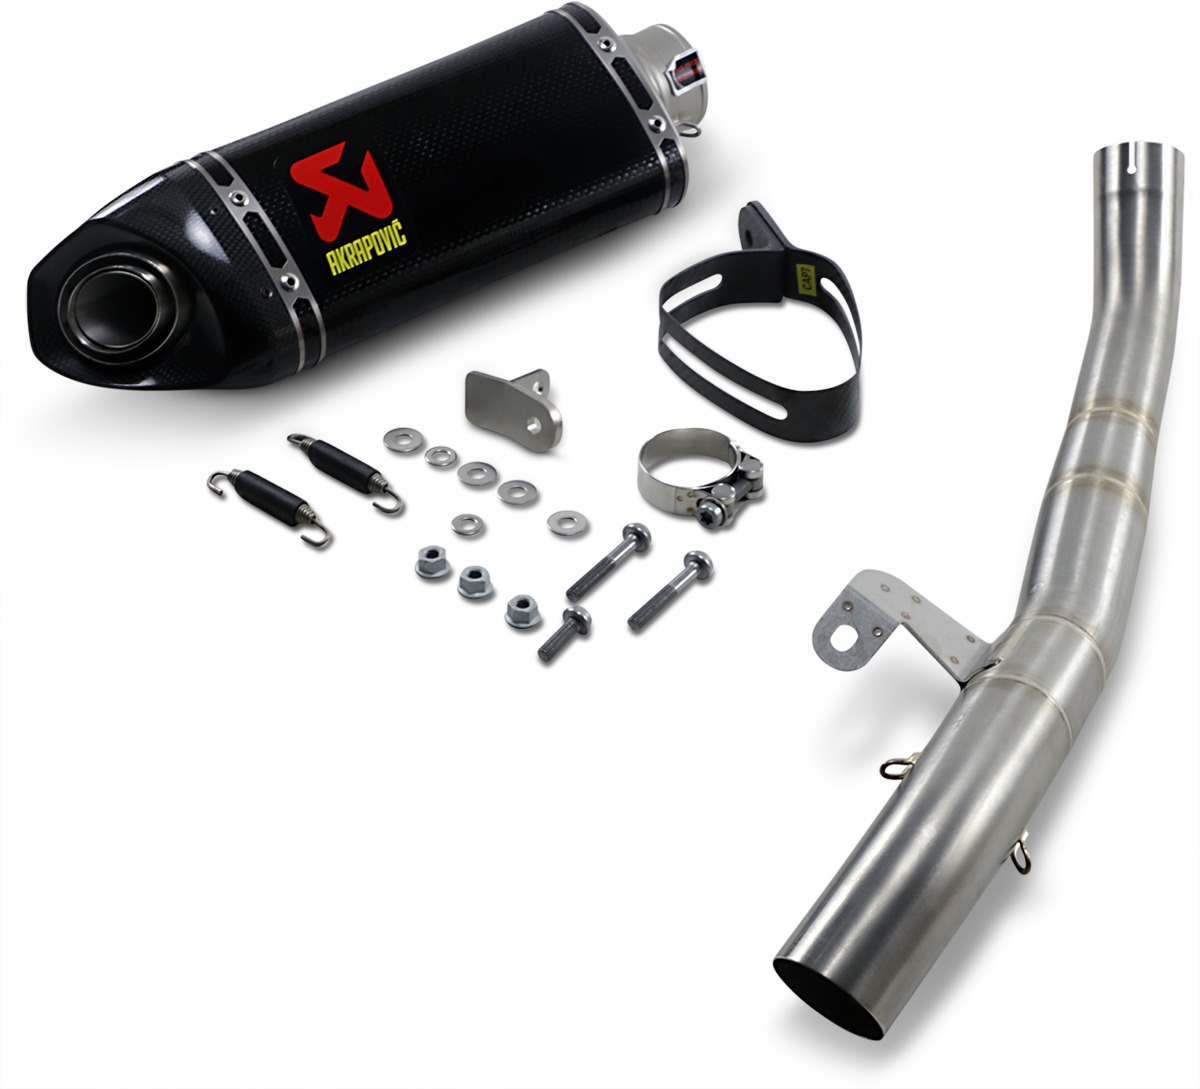 Race Slip On Exhaust - Carbon Fiber - For 17-20 Street Triple 765 - Click Image to Close